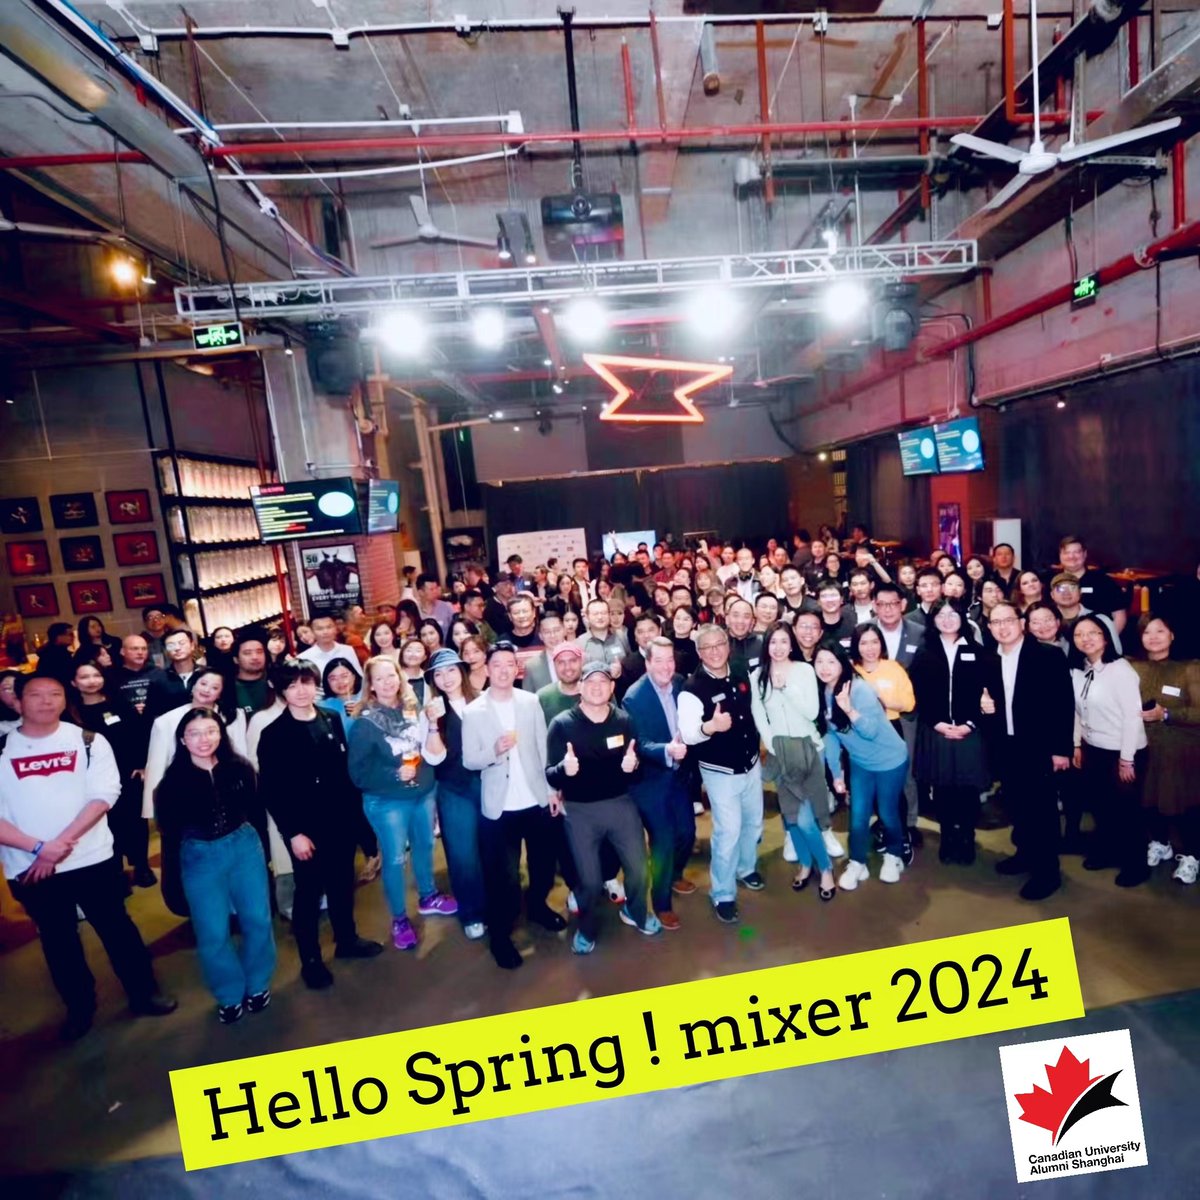 Our #UWaterlooalumni and Co-op students in Shanghai took part in a networking event with nearly 20 other Canadian universities on March 21st, representing Warriors at our 2024 Spring Mixer Event! #SpringMixer #UWGrad